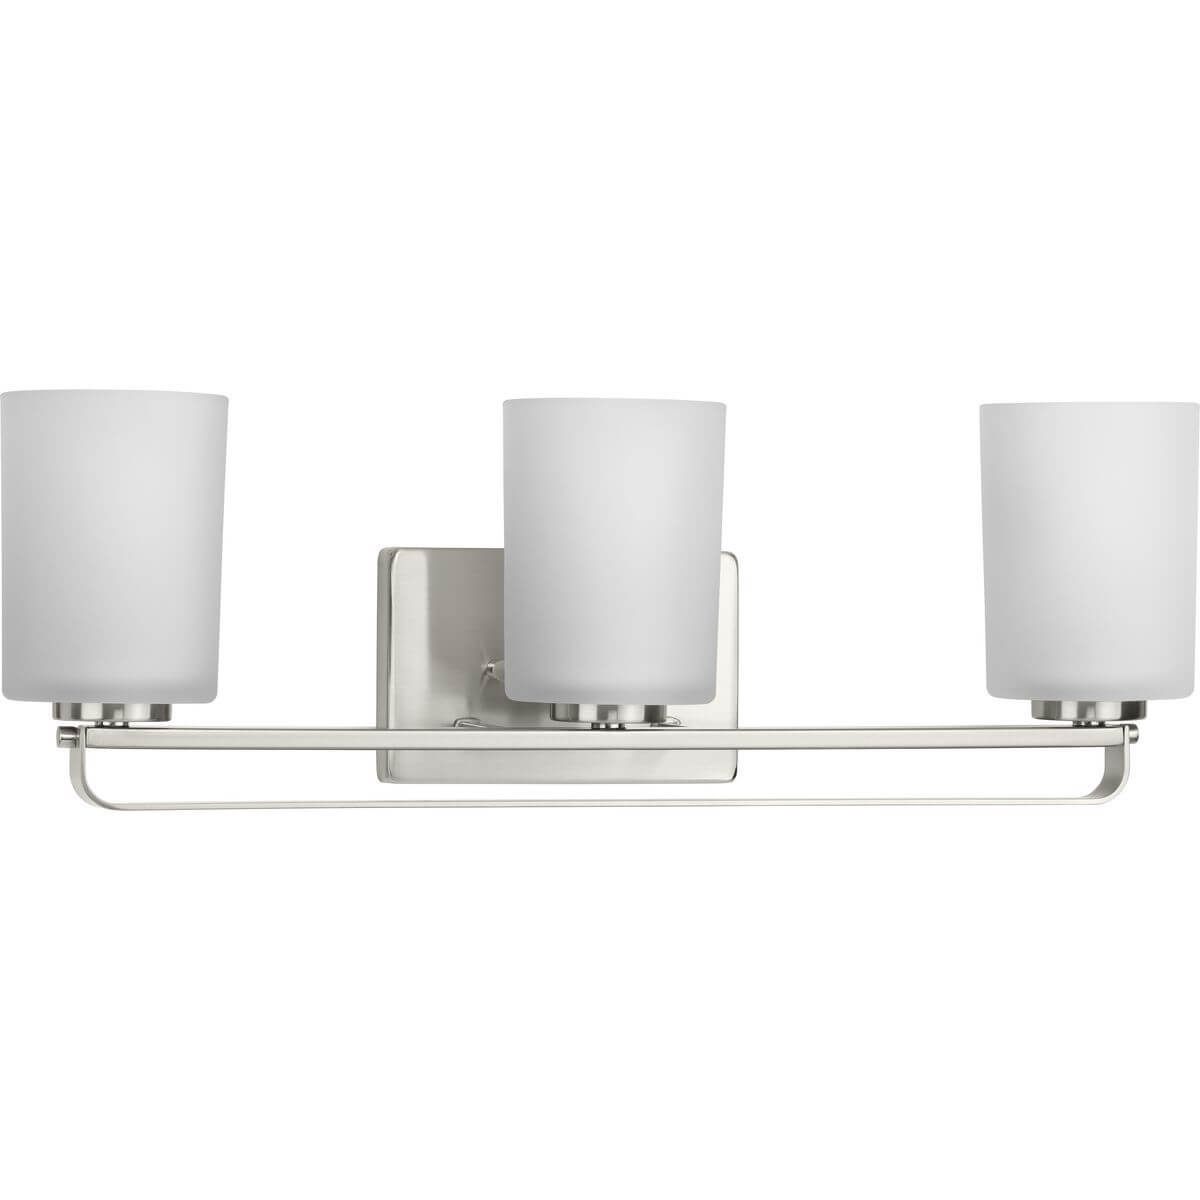 Progress Lighting League 3 Light 23 inch Bath Vanity Light in Brushed Nickel with Etched Glass P300343-009